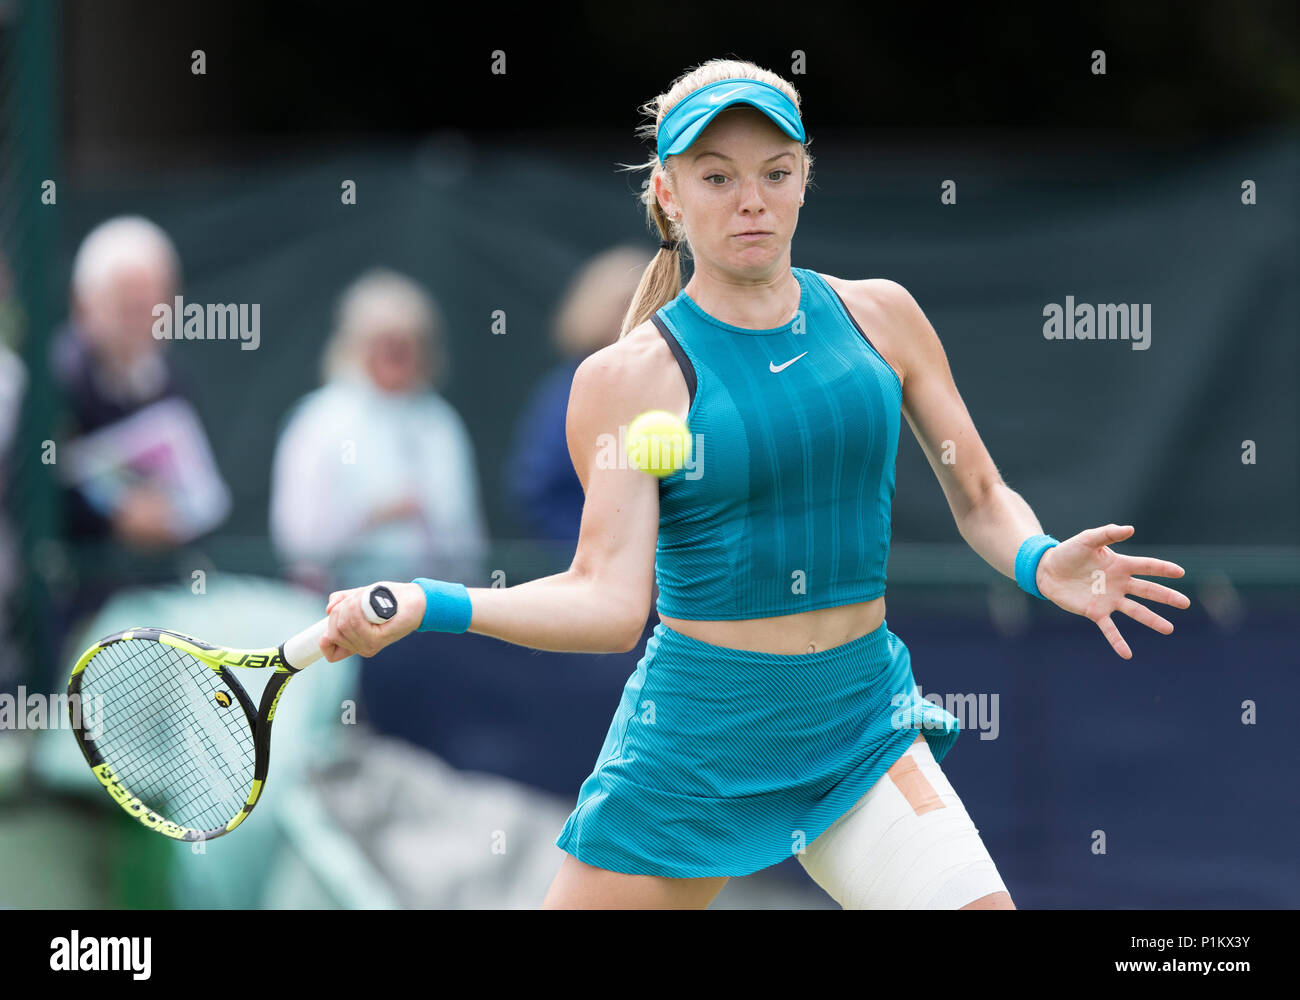 Katie Swan in action during the Nature Valley Open match between Mona Barthel of Germany and Katie Swan of Great Britain at Nottingham Tennis Centre,  Stock Photo